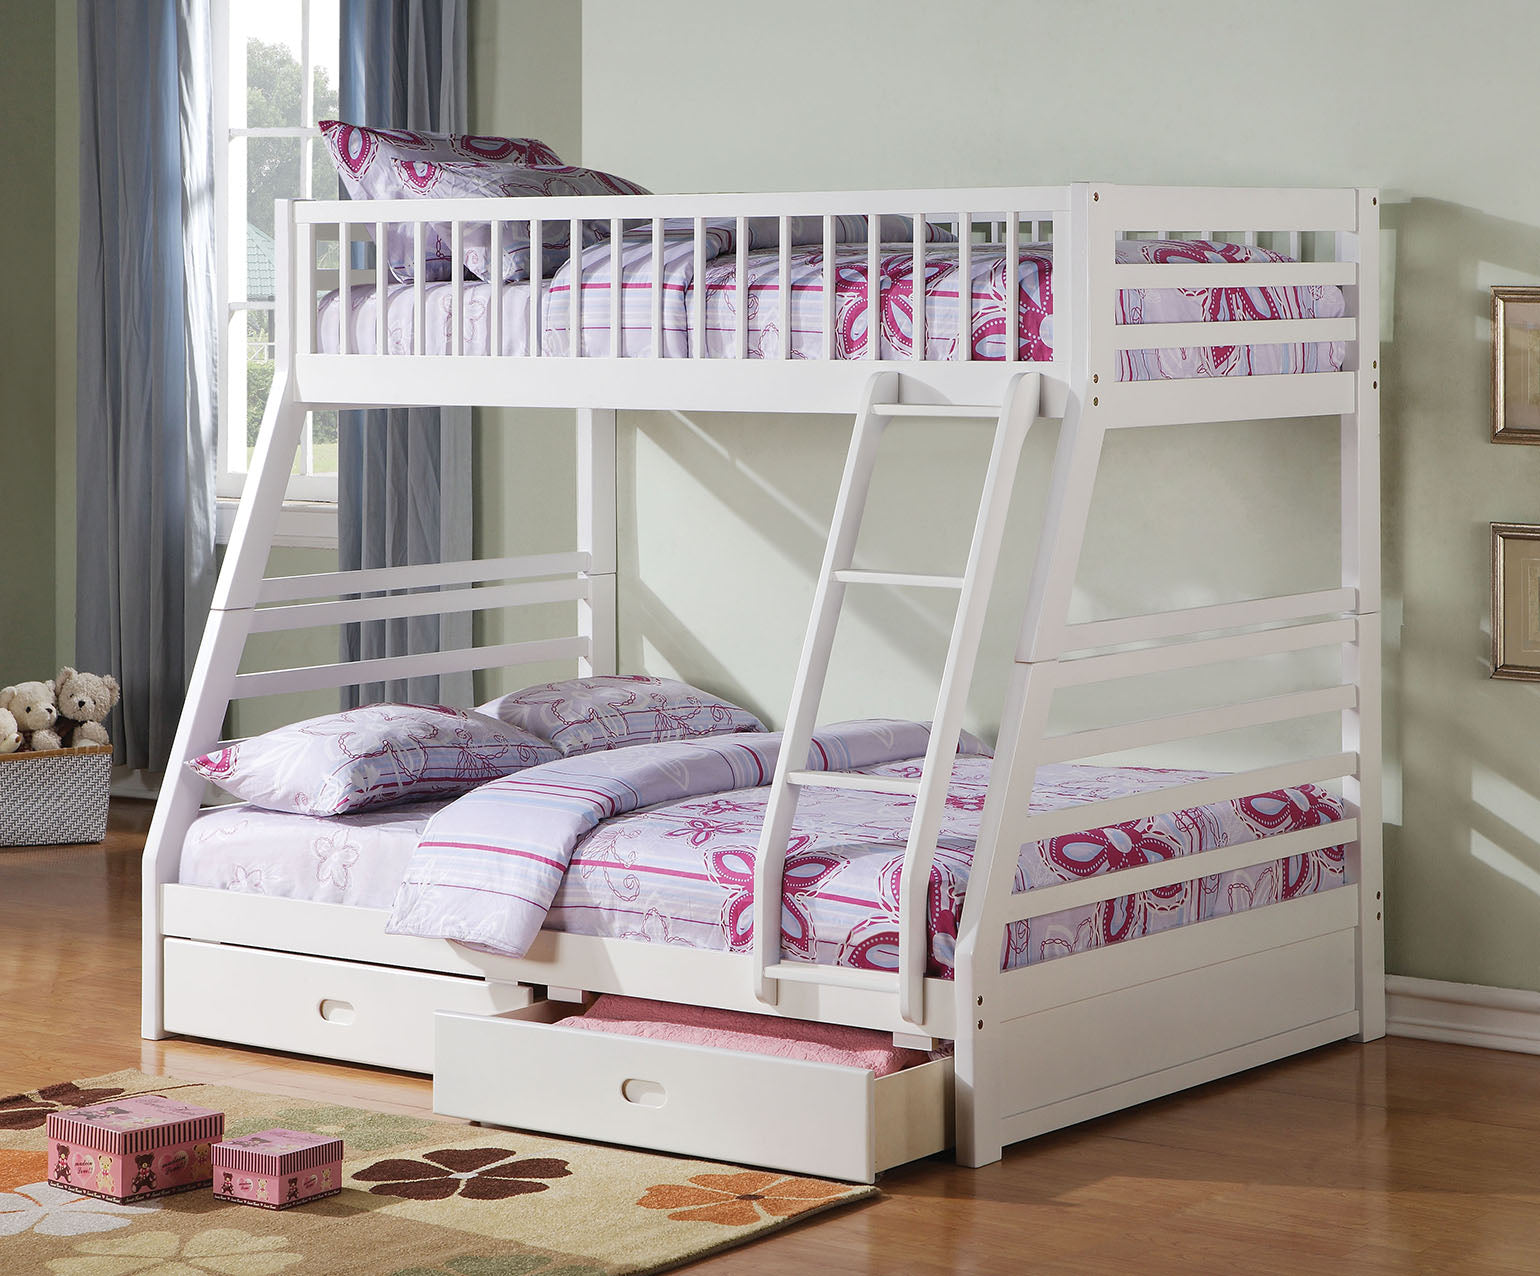 White Pine Wood Twin Over Full Bunk Bed 79inches X 57inches X 65inches